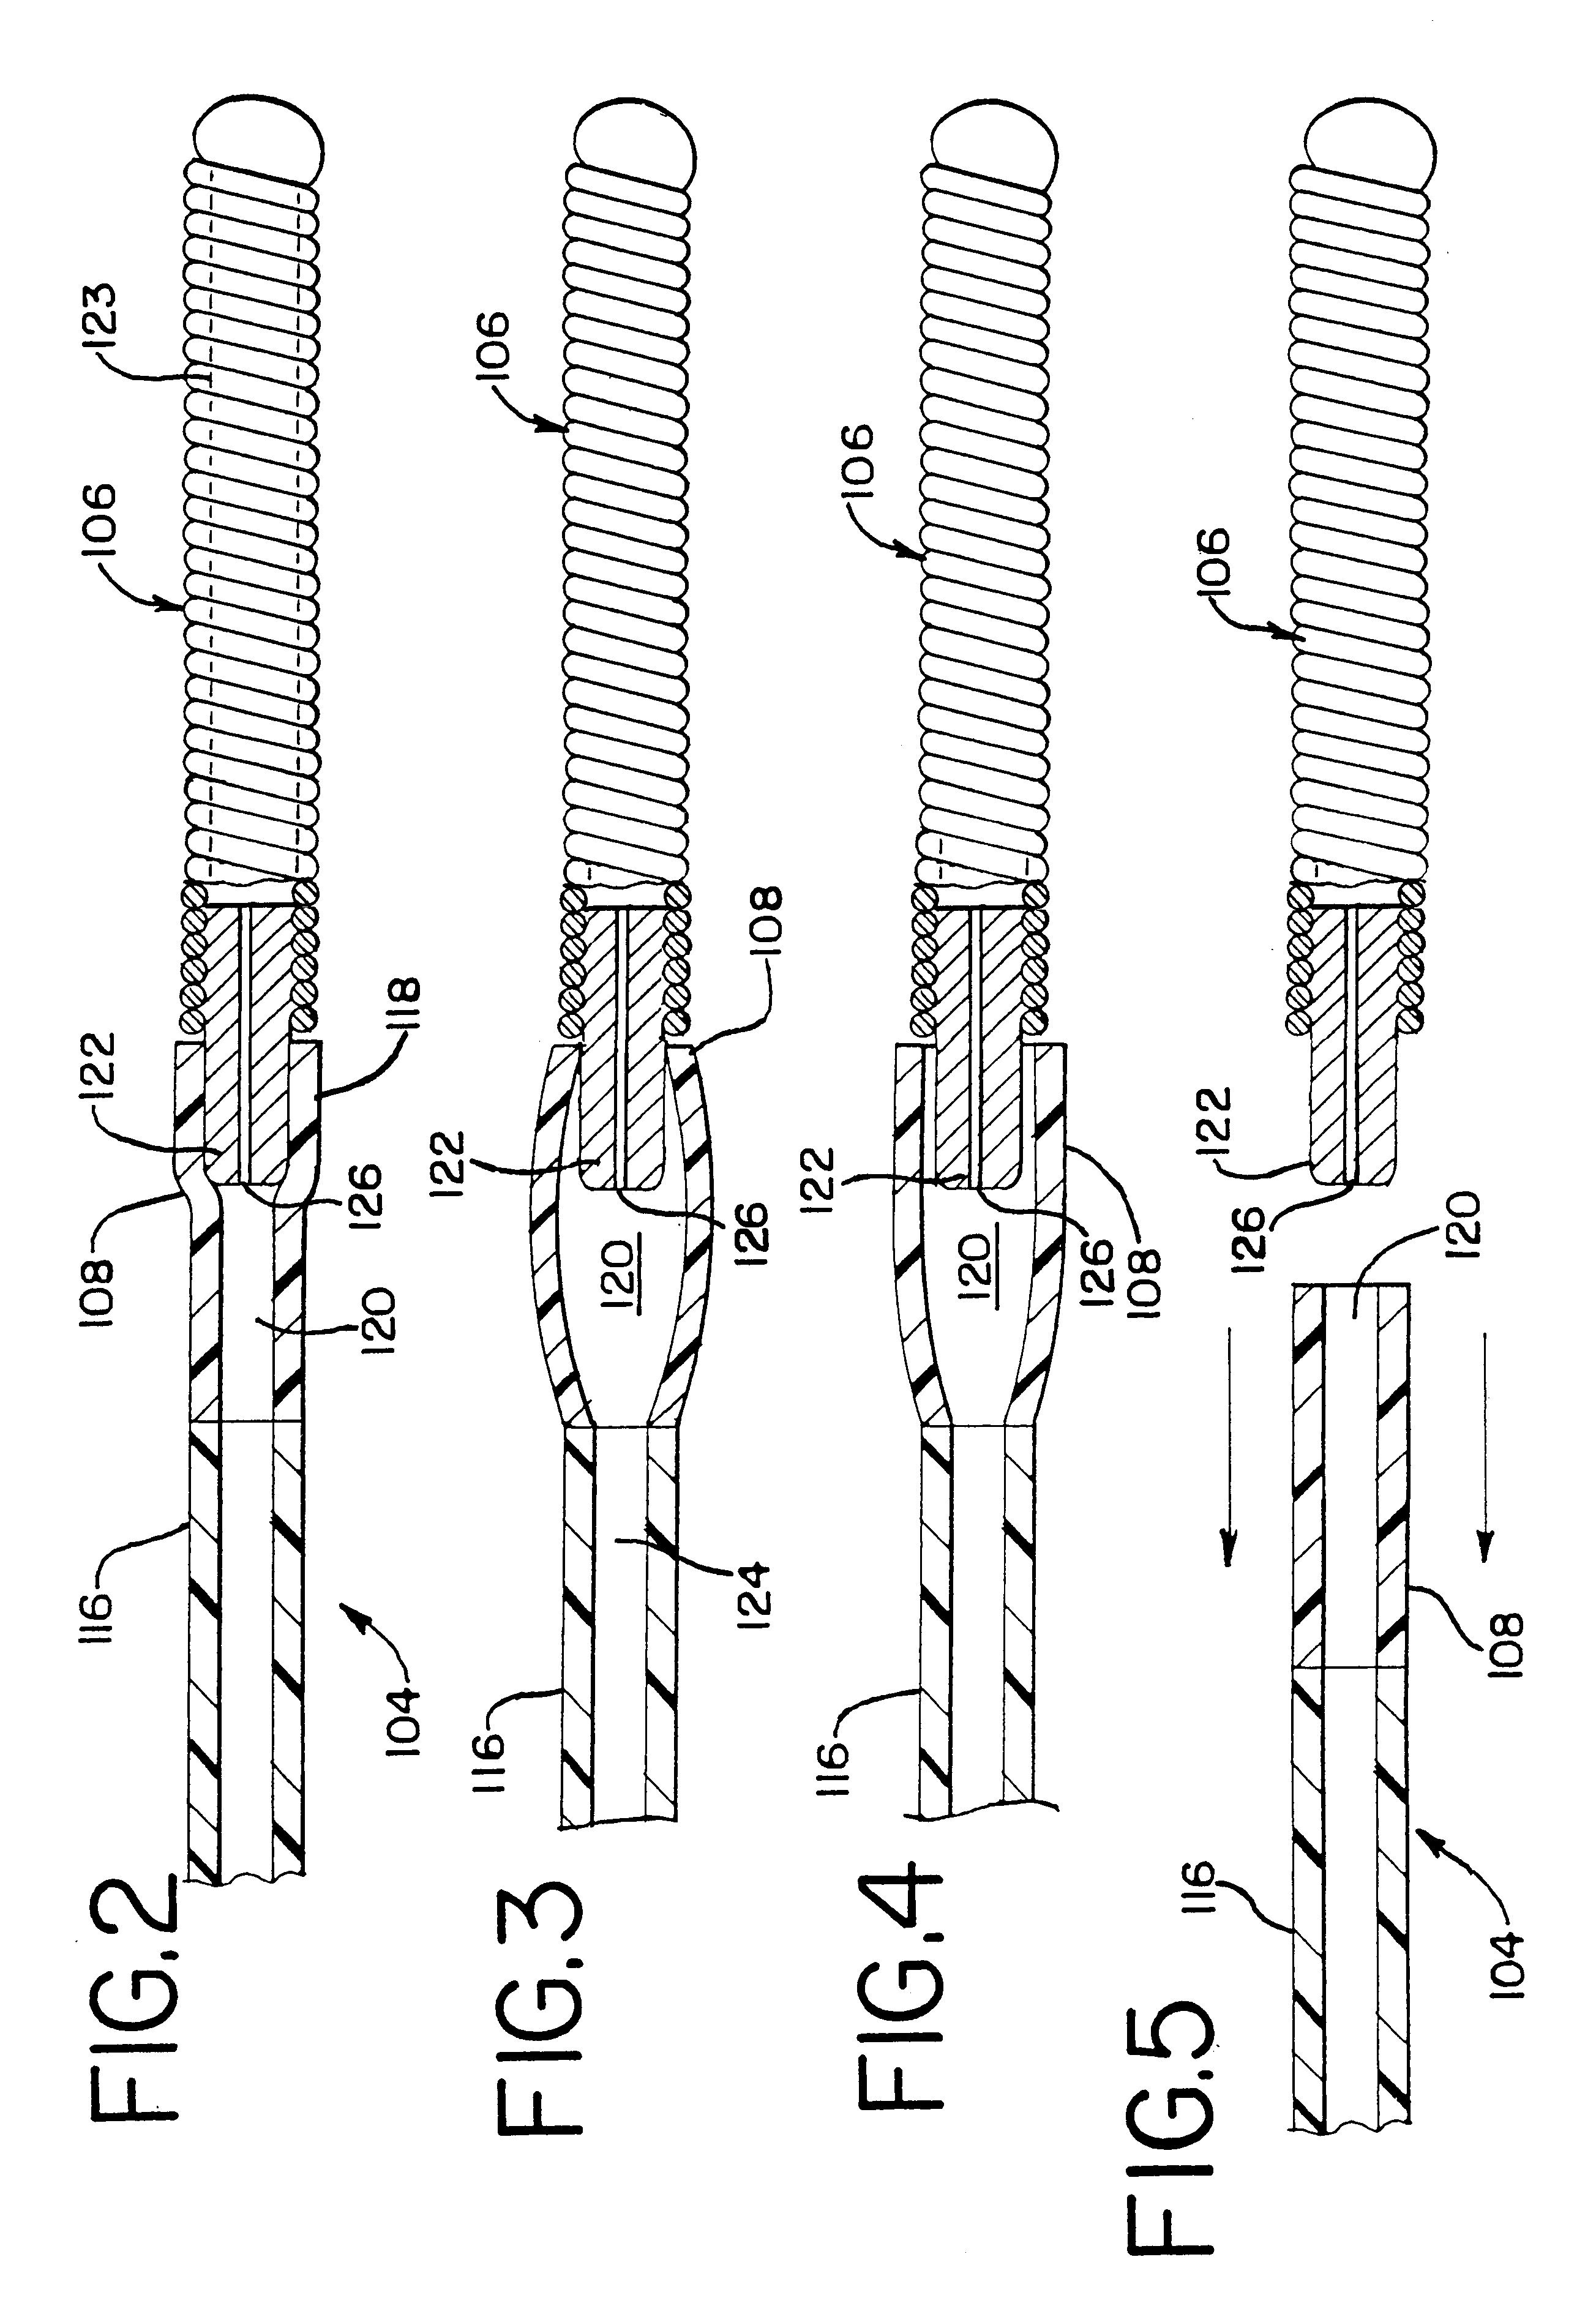 Embolic coil hydraulic deployment system with purge mechanism